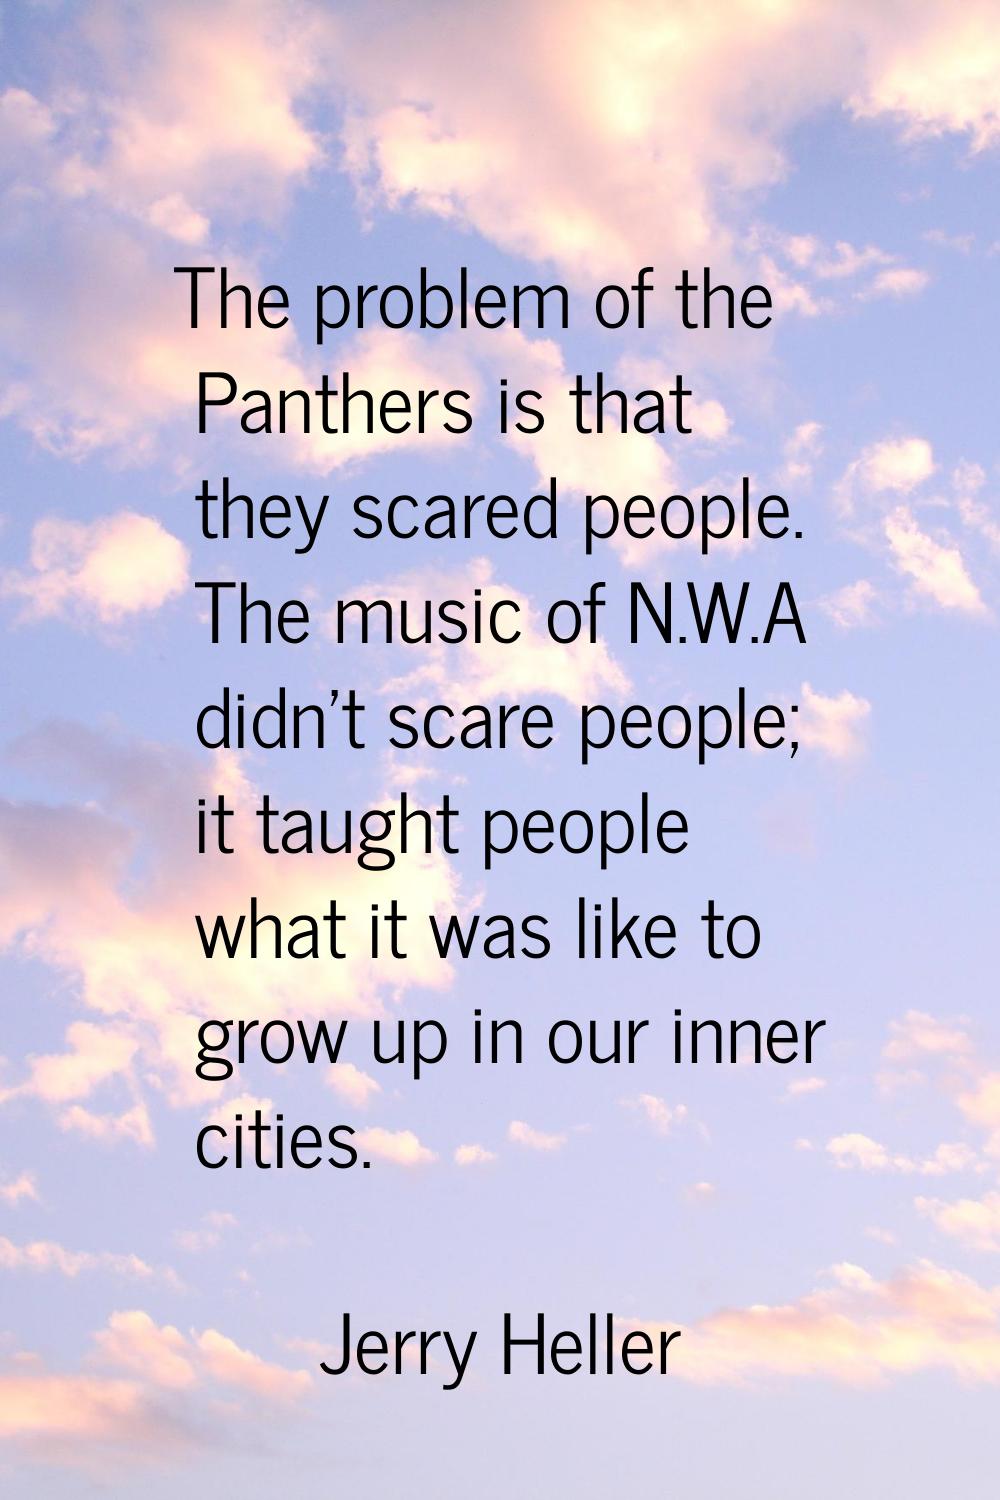 The problem of the Panthers is that they scared people. The music of N.W.A didn't scare people; it 